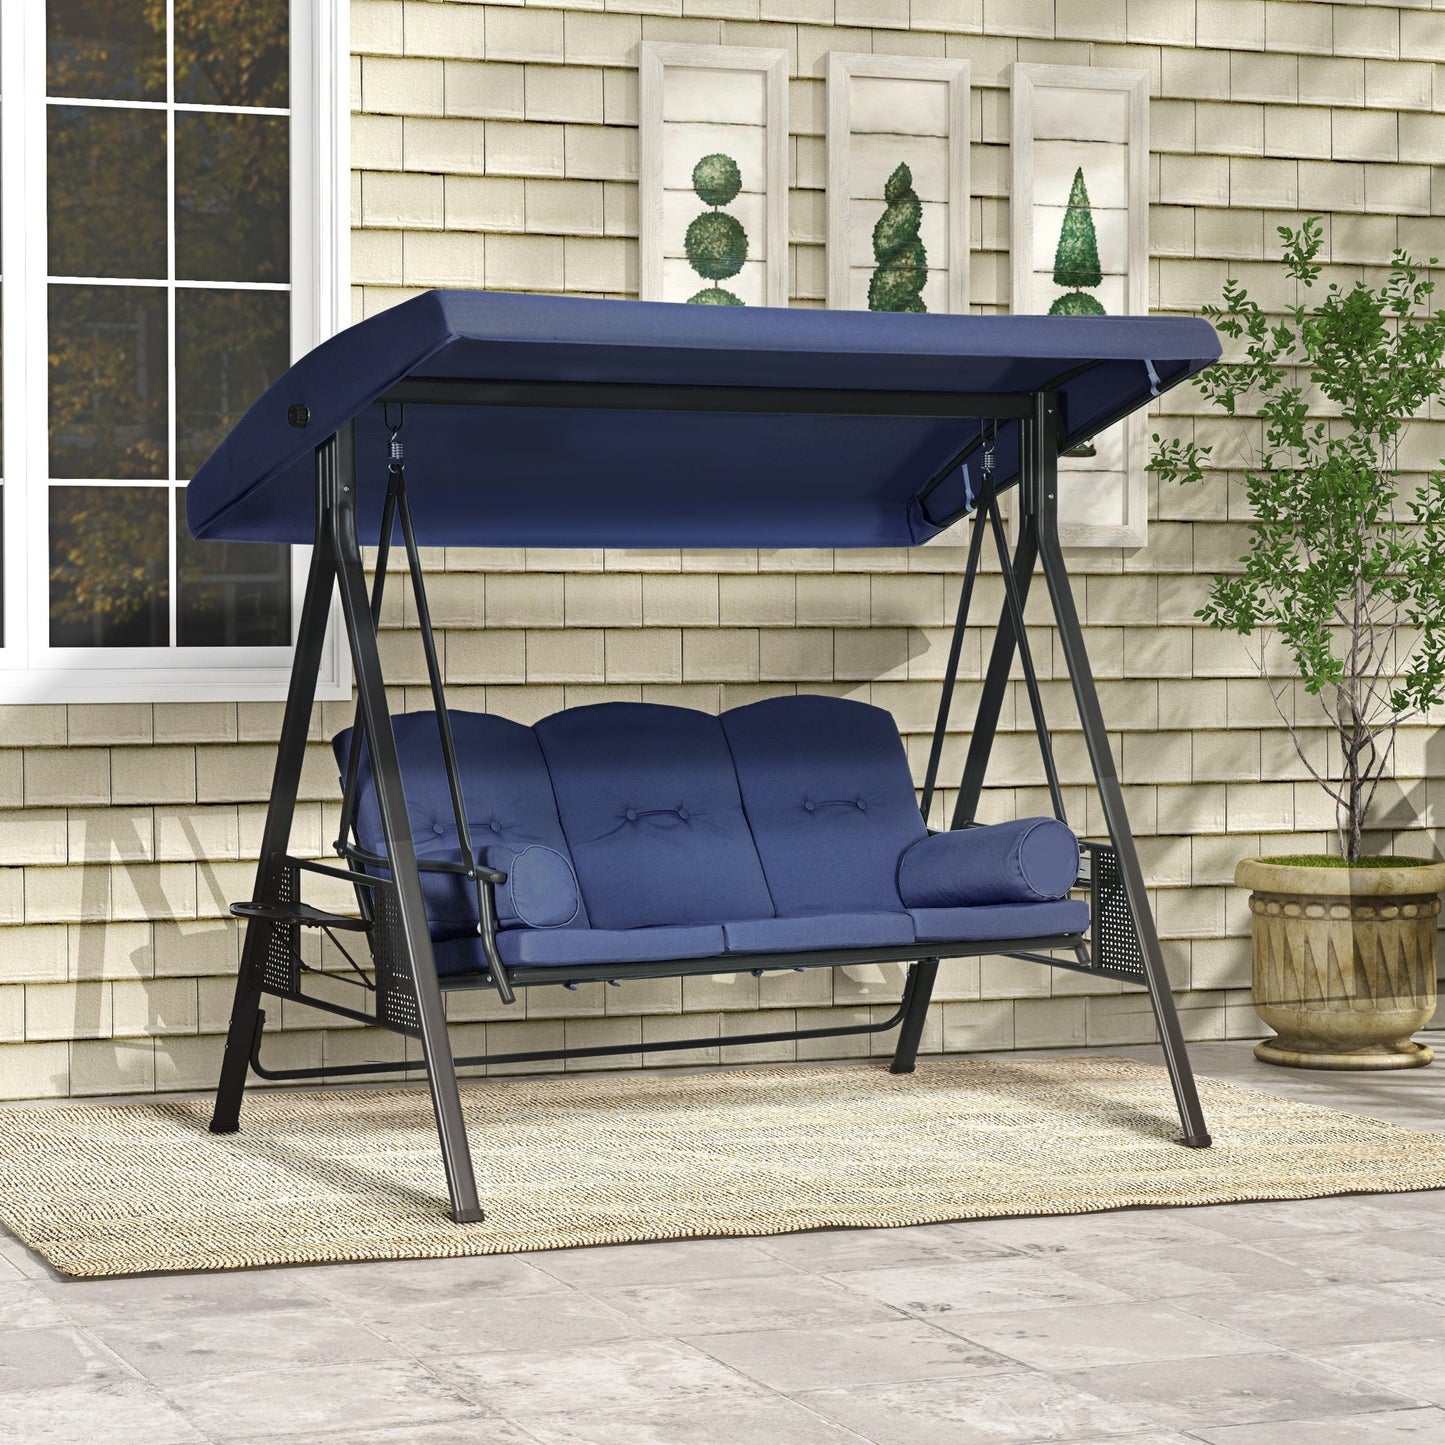 -Outsunny 3-Seat Outdoor Porch Swing Chair with Adjustable Canopy, Cushion and Pillows for Garden, Poolside, Dark Blue - Outdoor Style Company